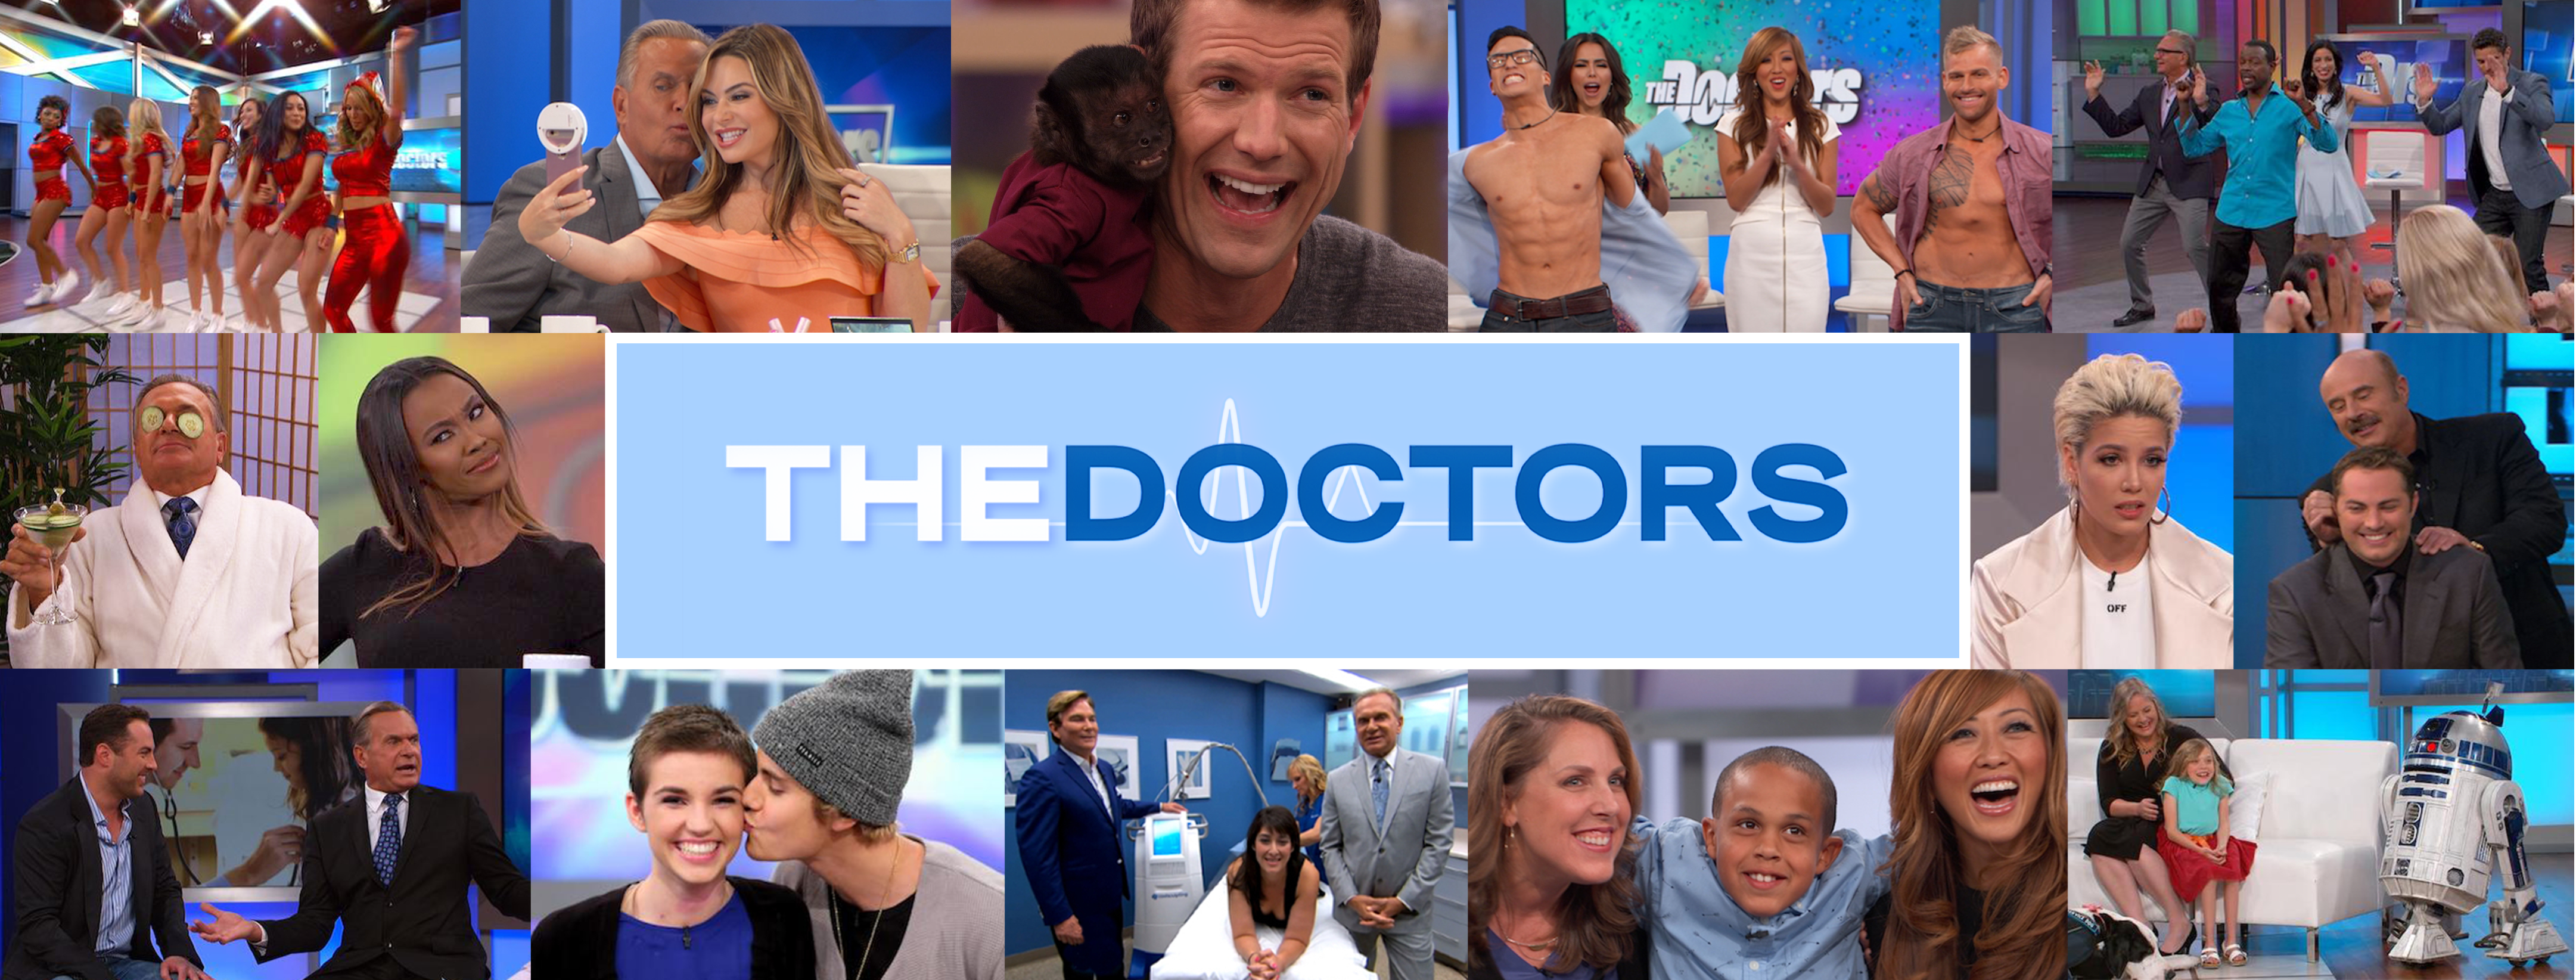 Dr Pimple Popper Returns With Shocking Ear Cyst Videos The Doctors Tv Show